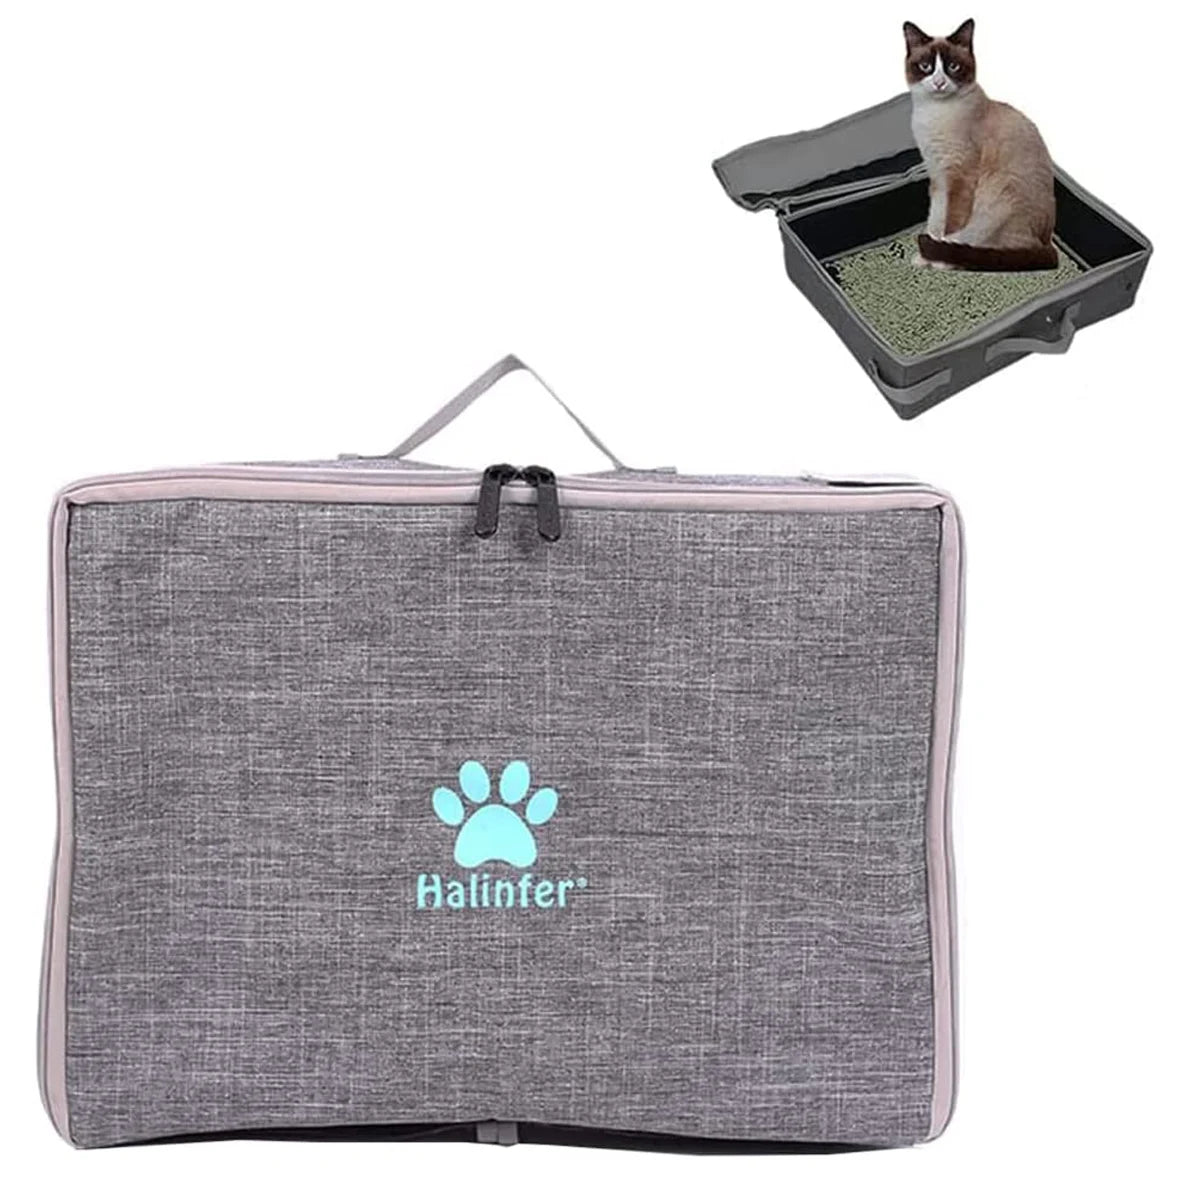 Portable Cat Travel Litter Box with Lid, Collapsible Car Cat Litter Box Waterproof and Easy to Clean